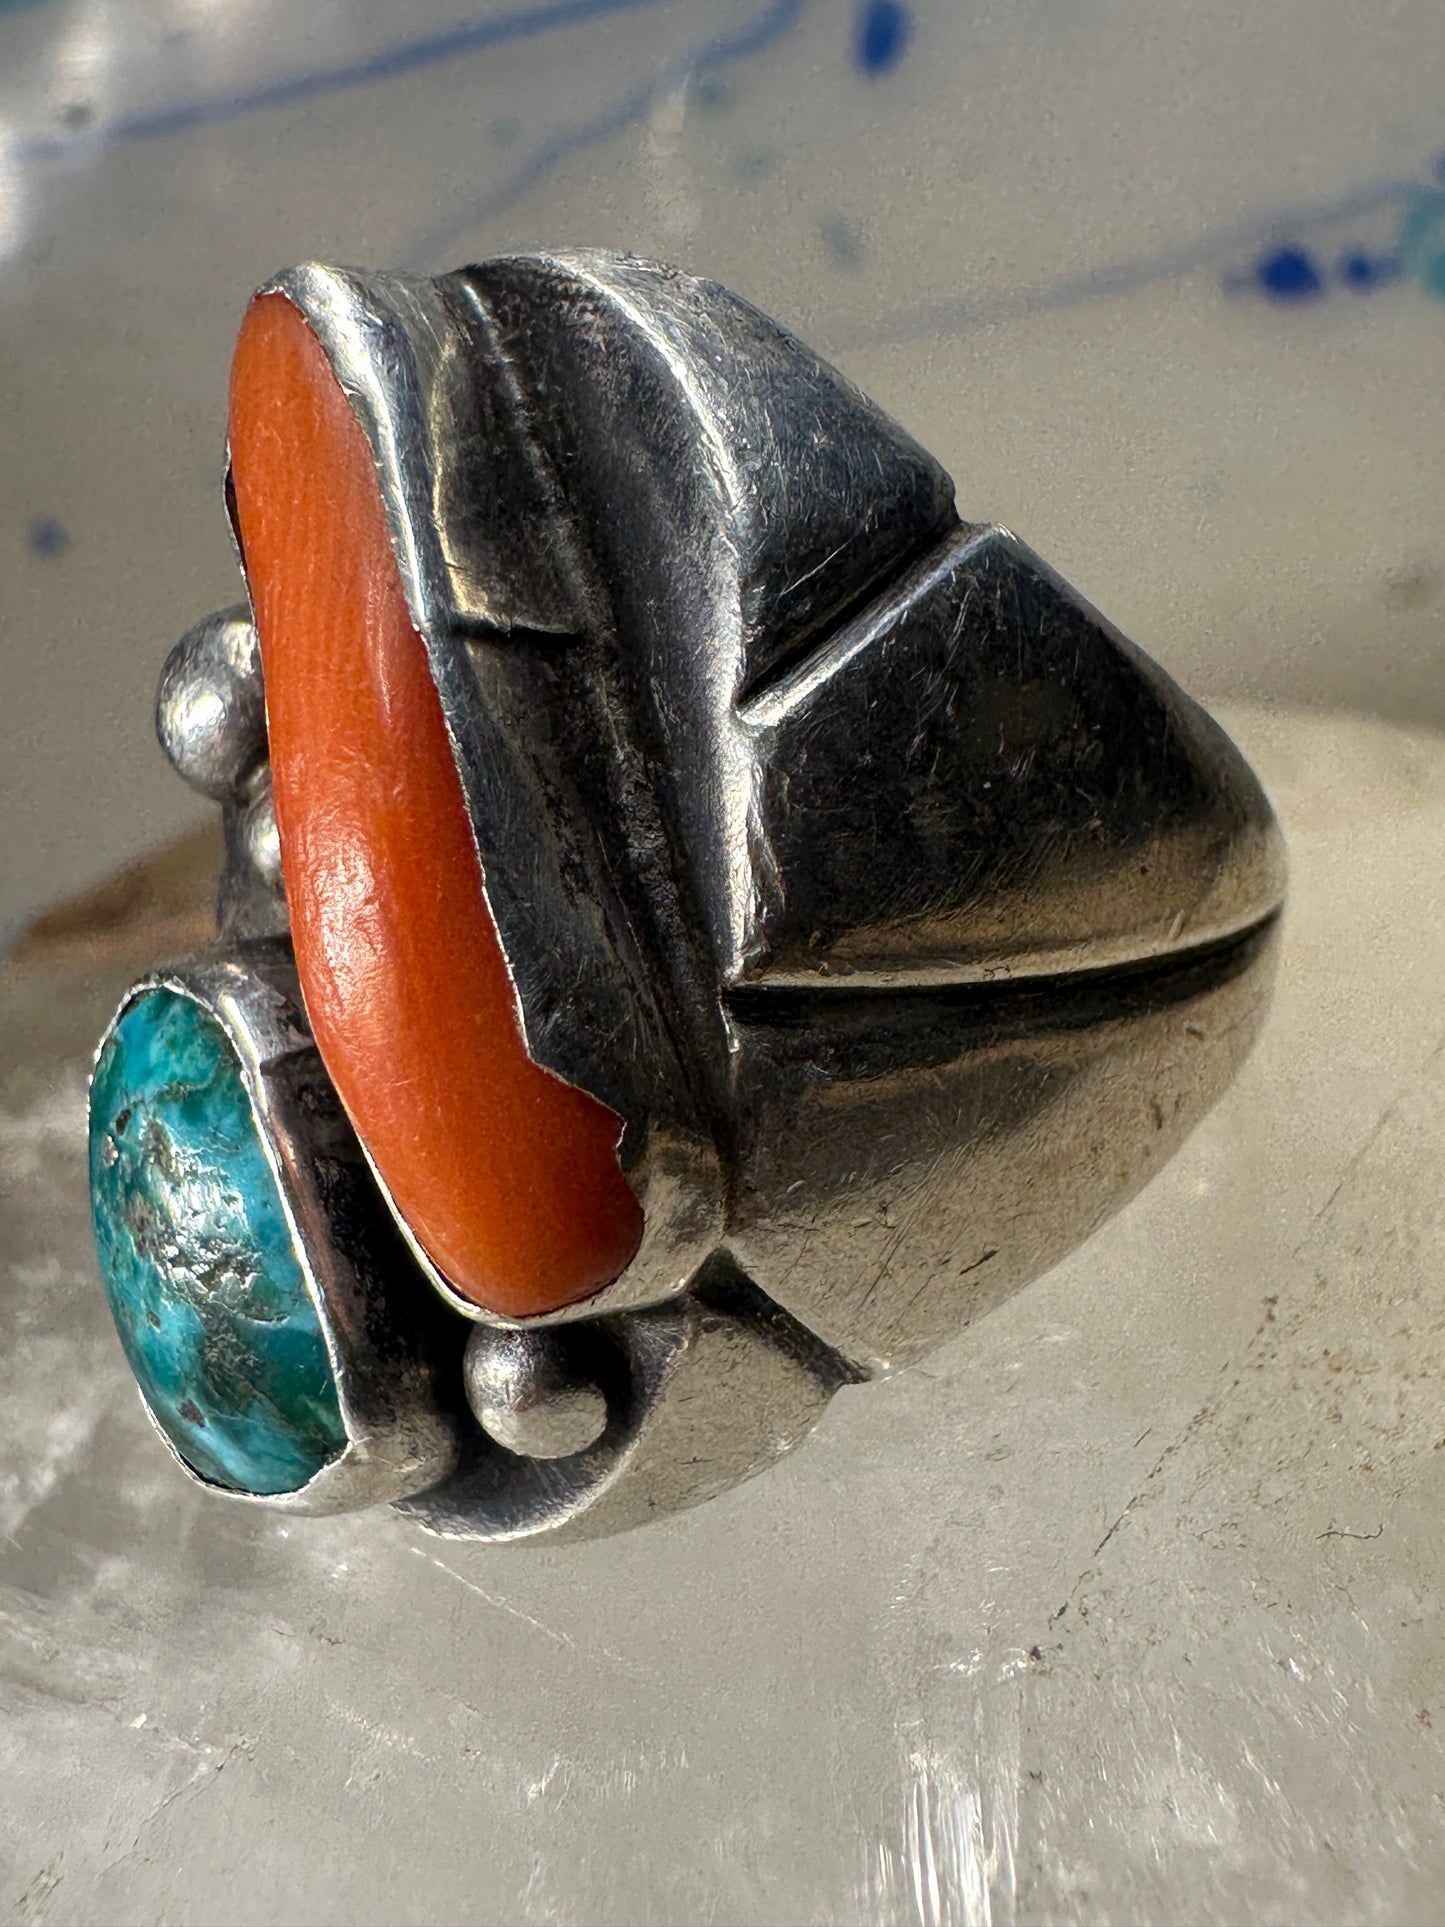 Navajo ring size 9.25 turquoise coral band sterling silver band women men